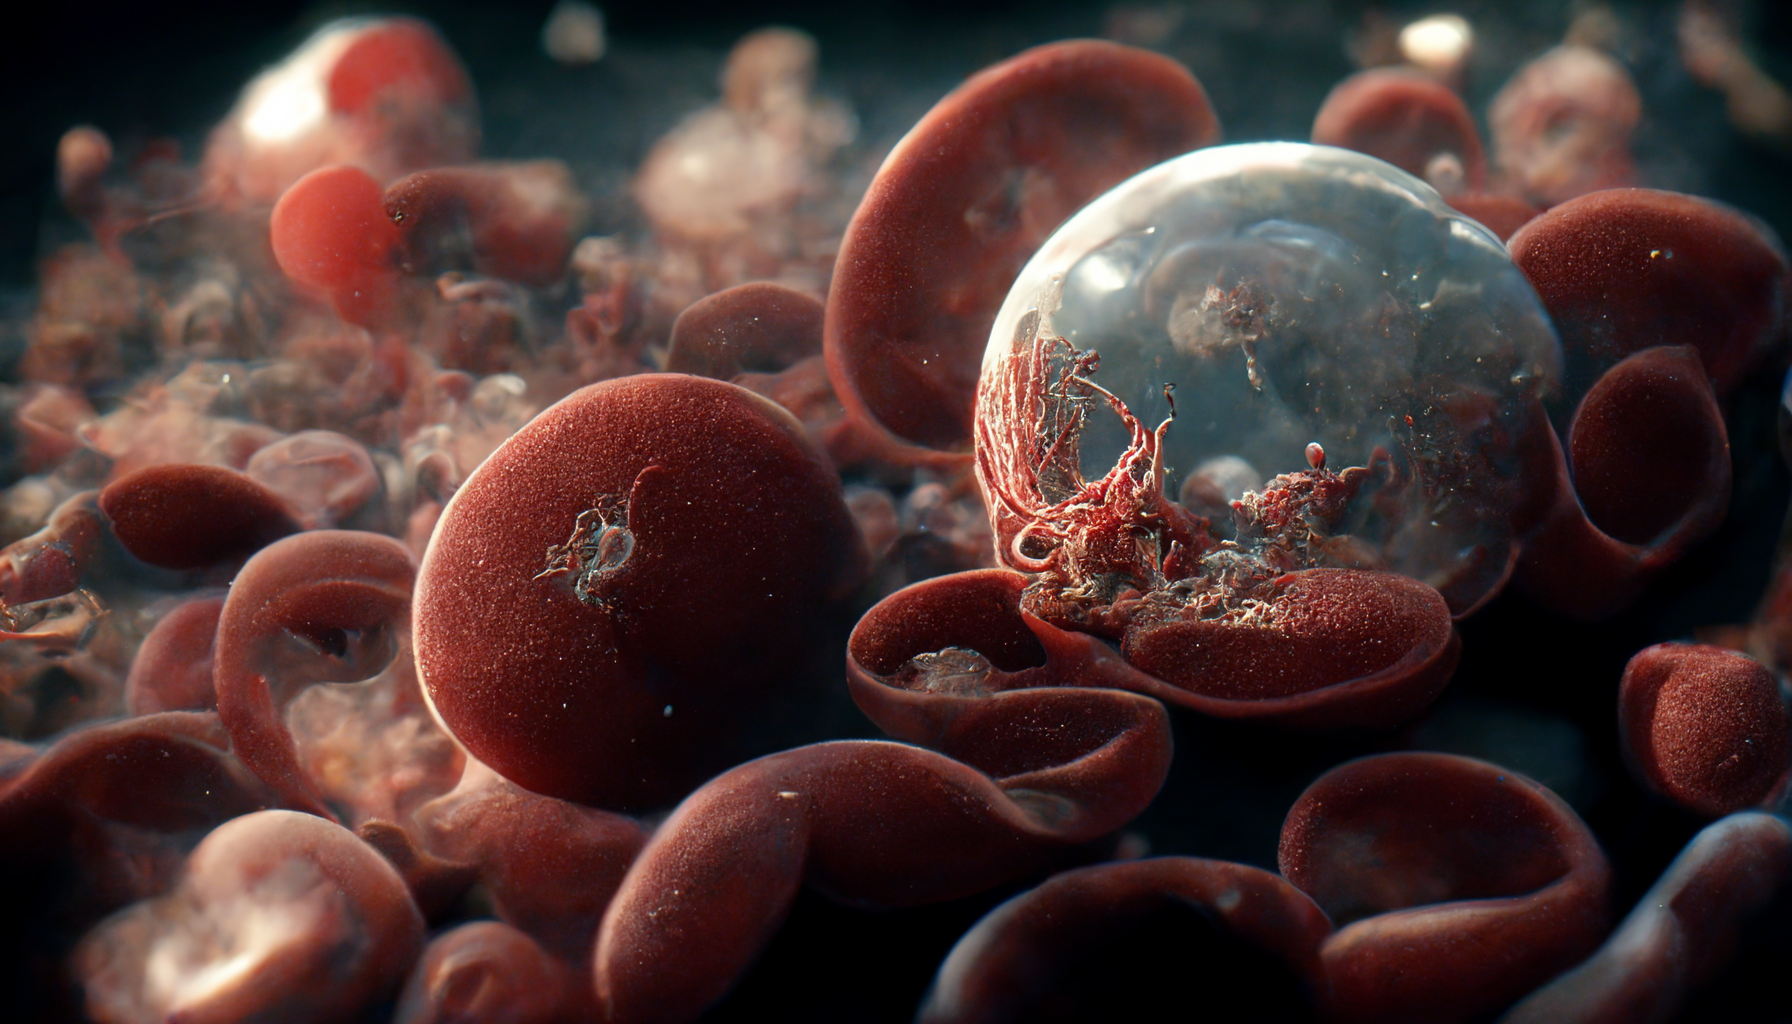 Christopher_A_erythrocyte_floating_in_the_body_high_detail_8K_r_63a434e4-2f5b-4d8d-922c-84a326e3b7c7.png